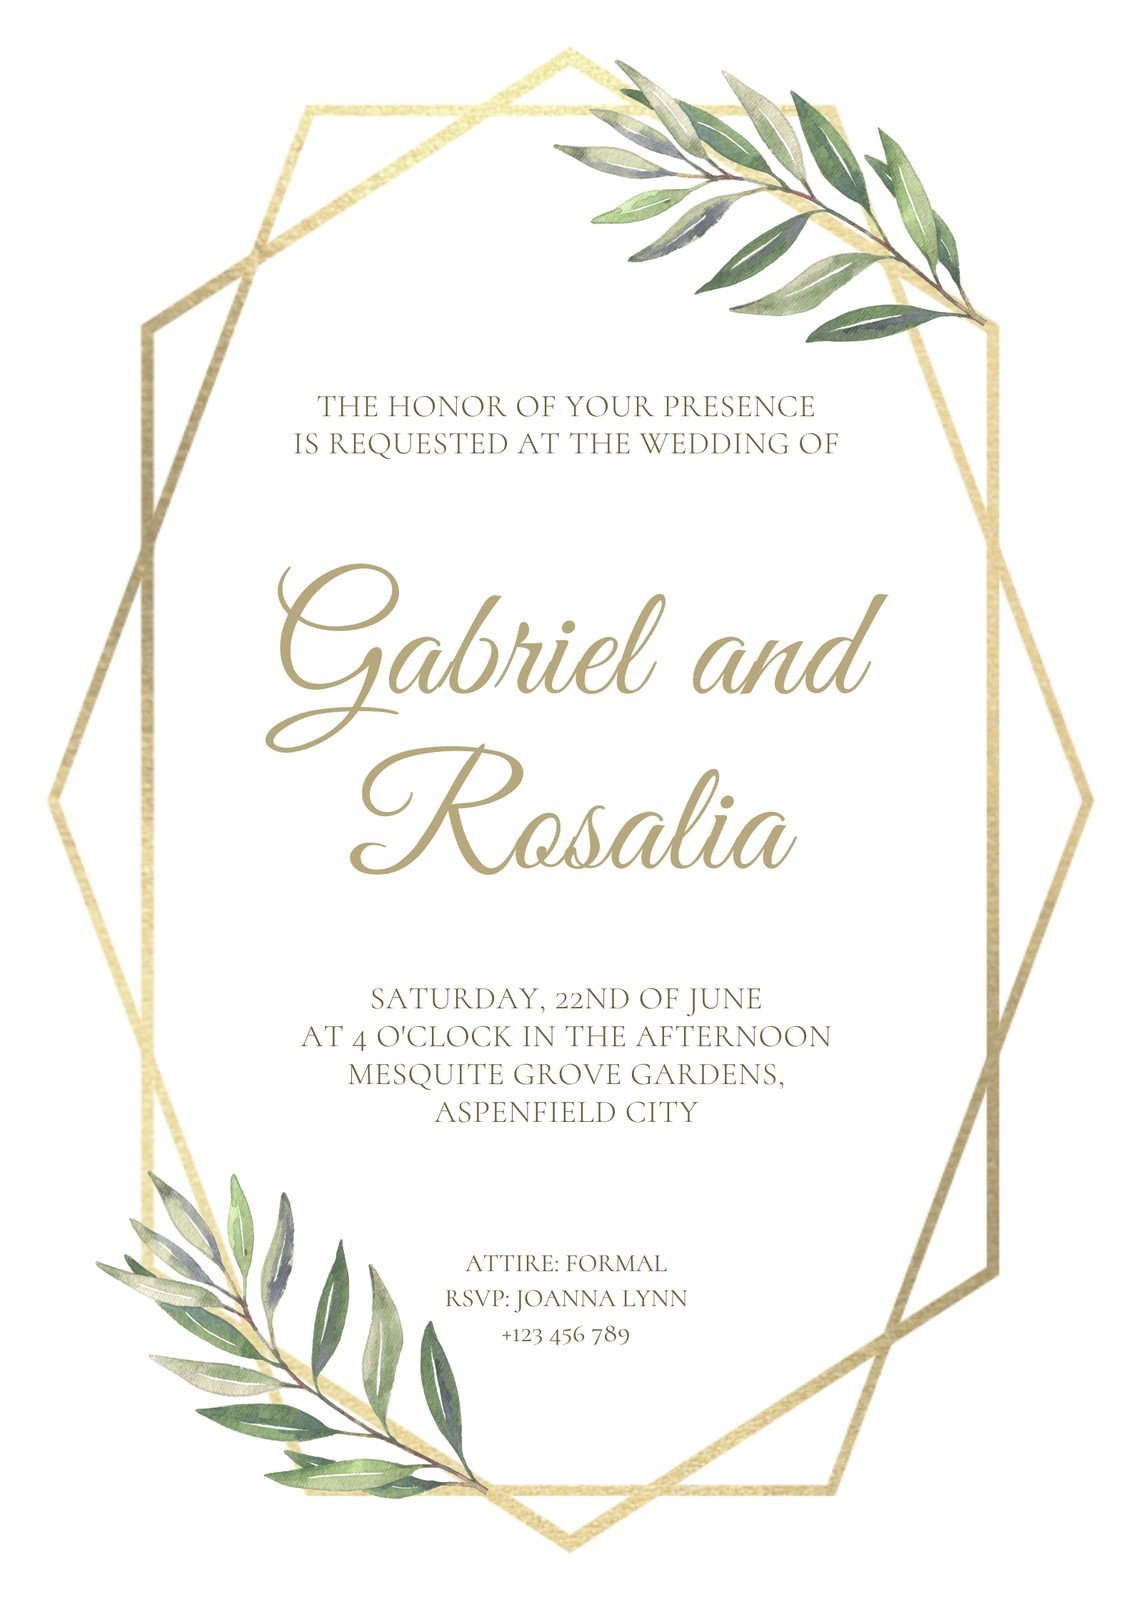 White and Gold Bordered Geometric Floral Wedding Invitation Templates